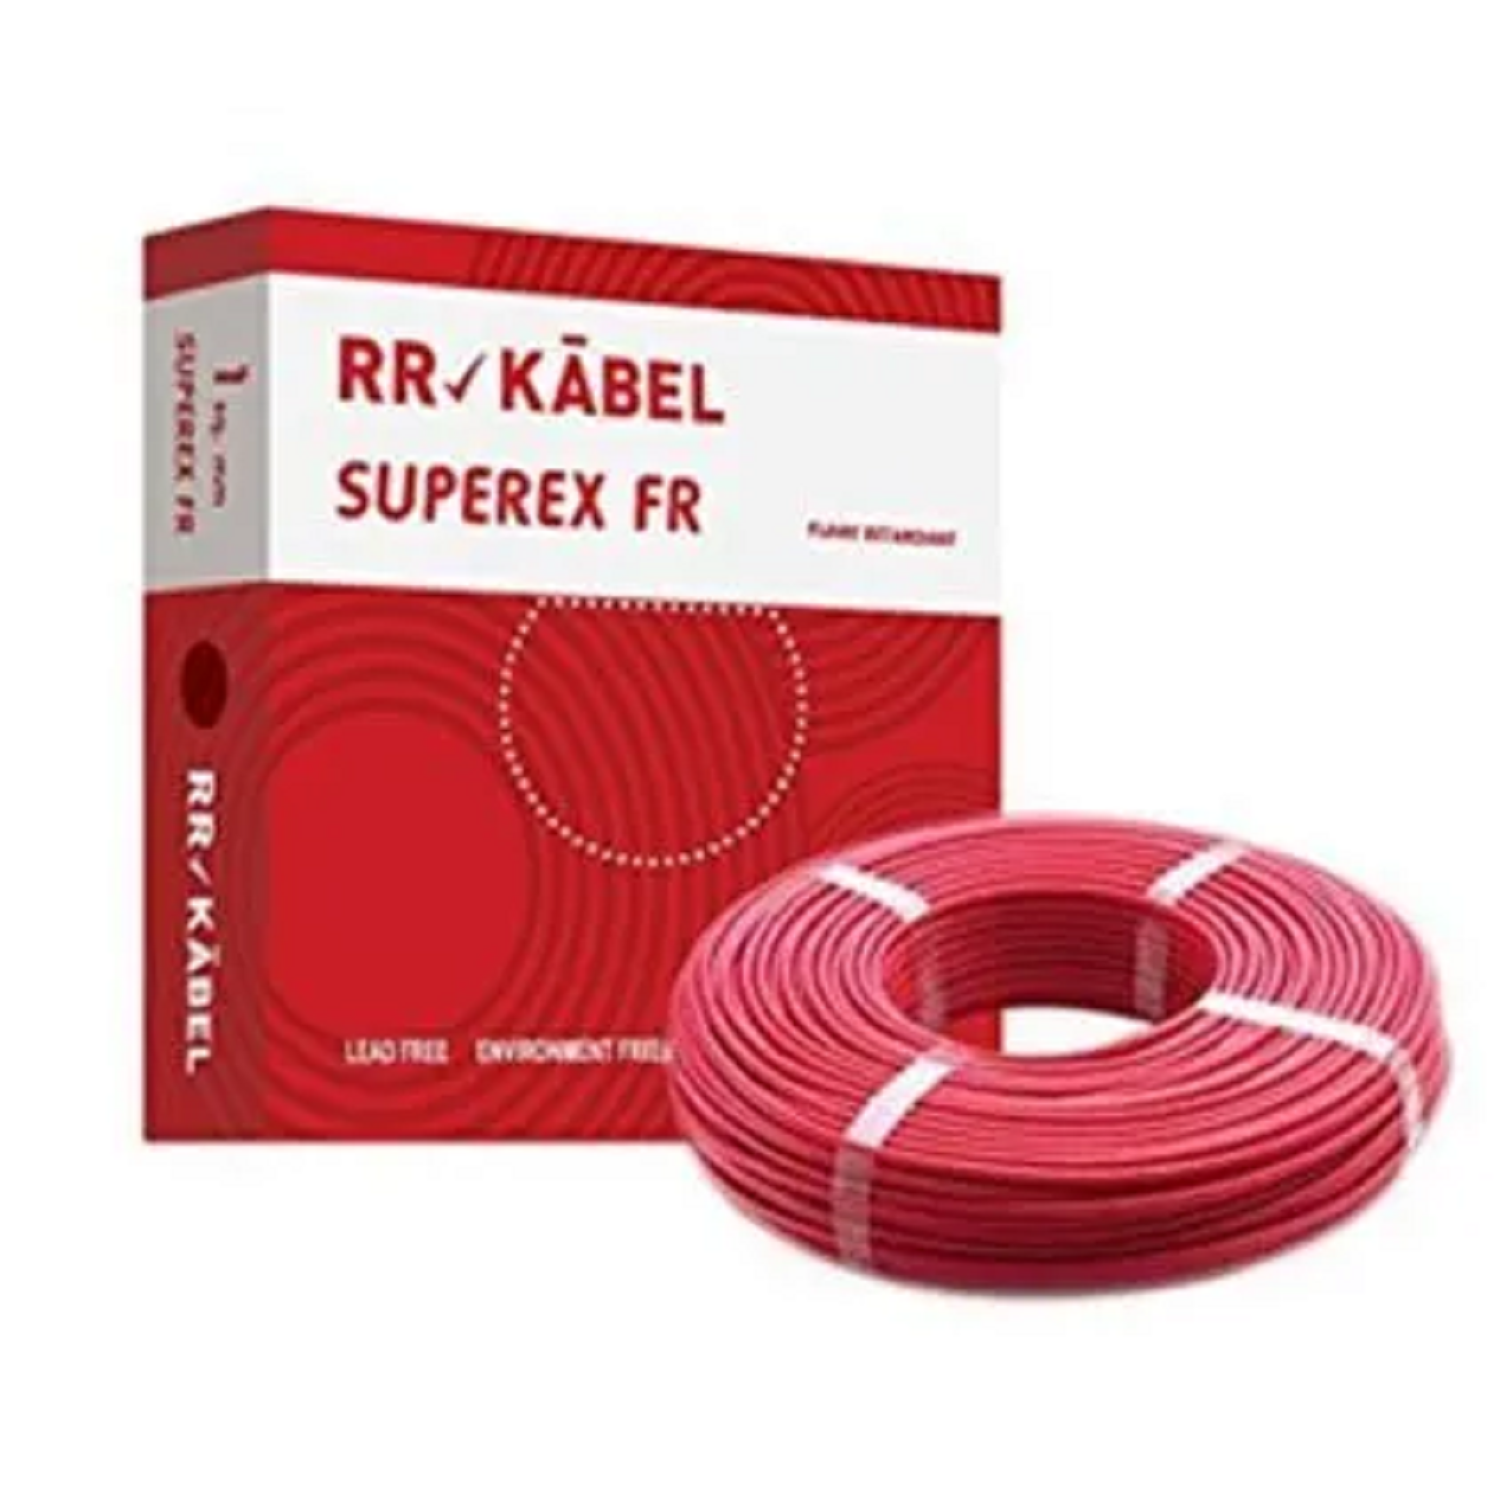 1.5 Sqmm RR FR Single Core Copper Wire (90 Mtr) With PVC Insulated for House 38 Industrial Uses (Red